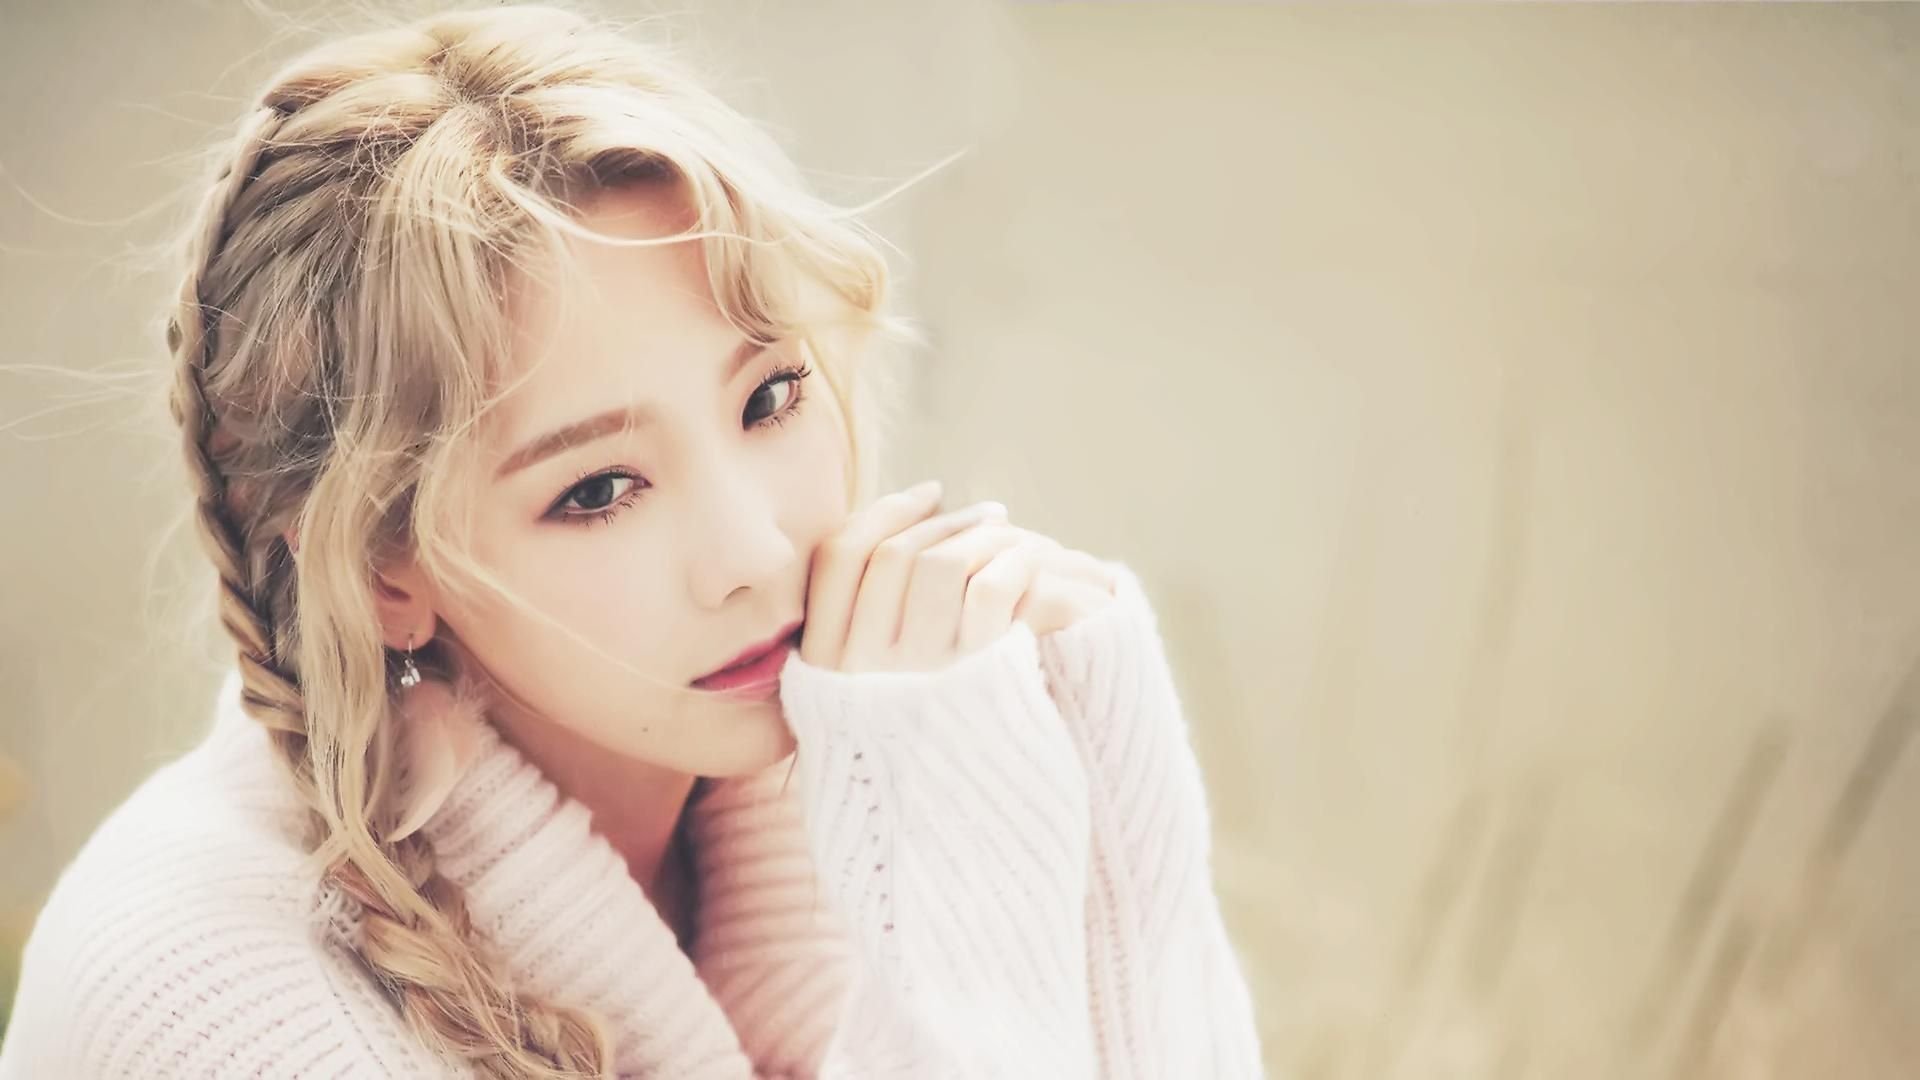 1920x1080 Snsd Taeyeon Wallpapers Top Free Snsd Taeyeon Backgrounds